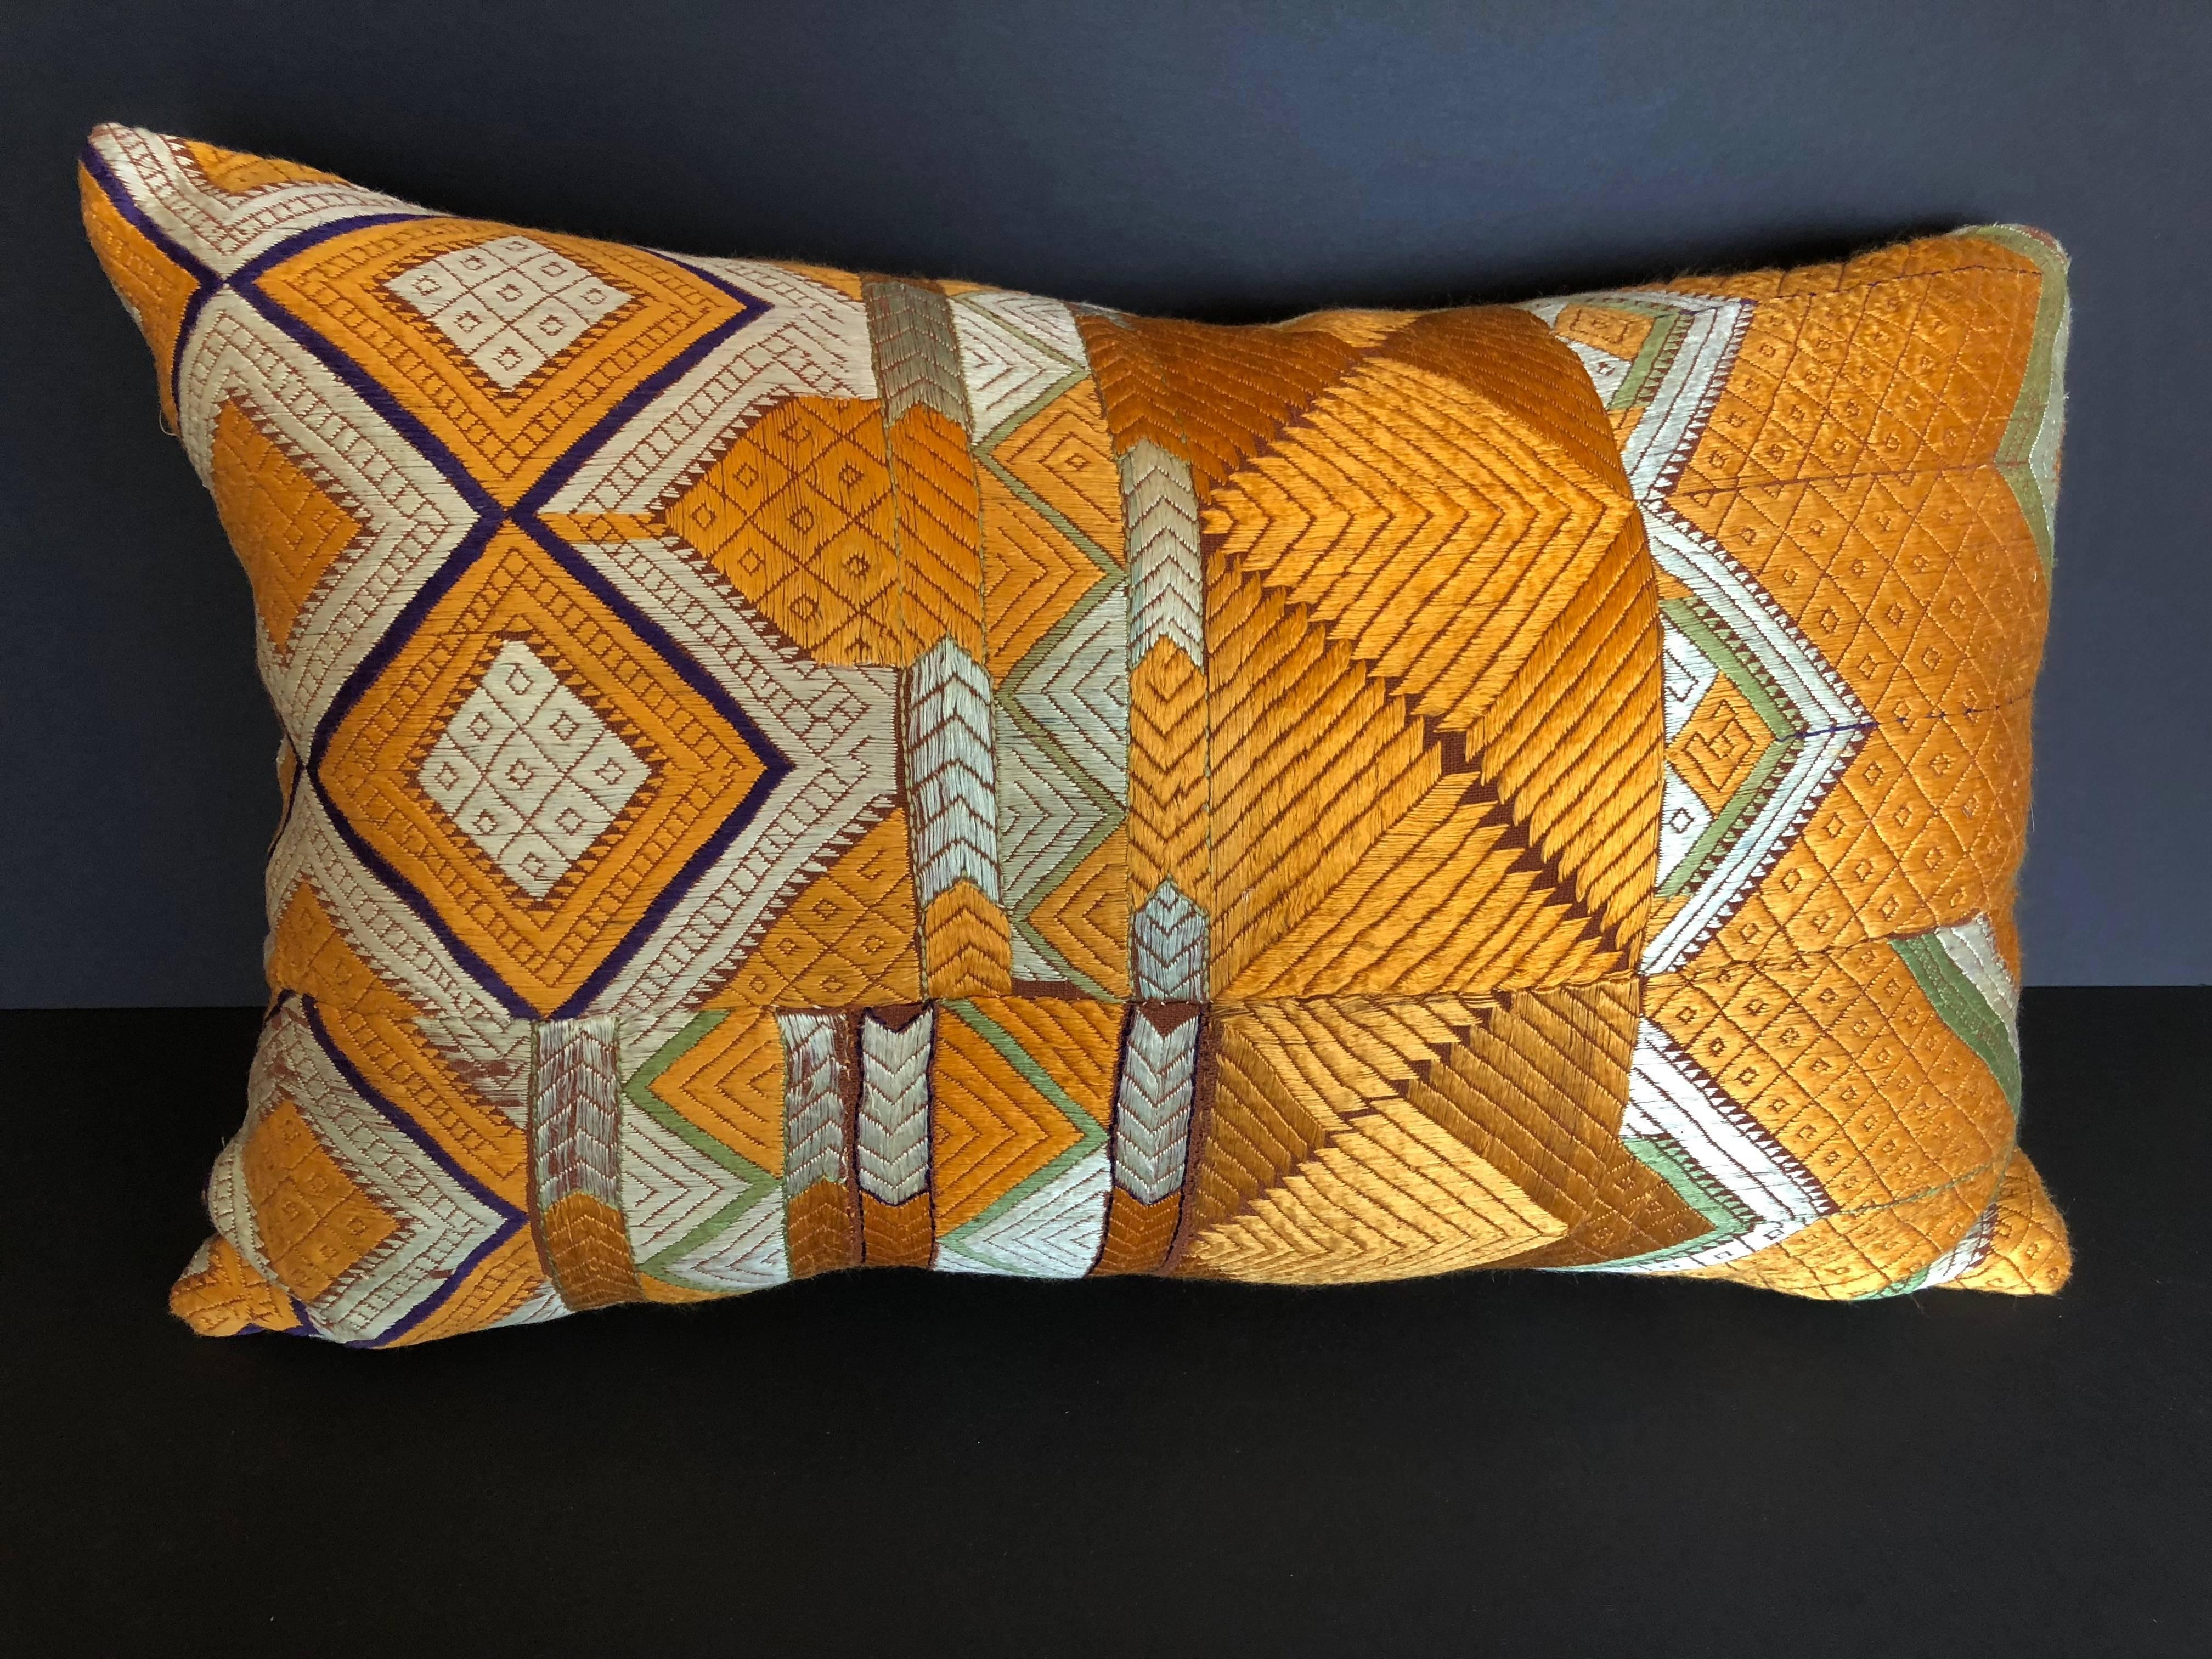 Custom pillow cut from a vintage silk Phulkari Bagh wedding shawl from Punjab, India. Hand loomed cotton khadi cloth is hand embroidered with vibrant silk threads. The shawl is made by relatives of the young bride for her wedding and other special